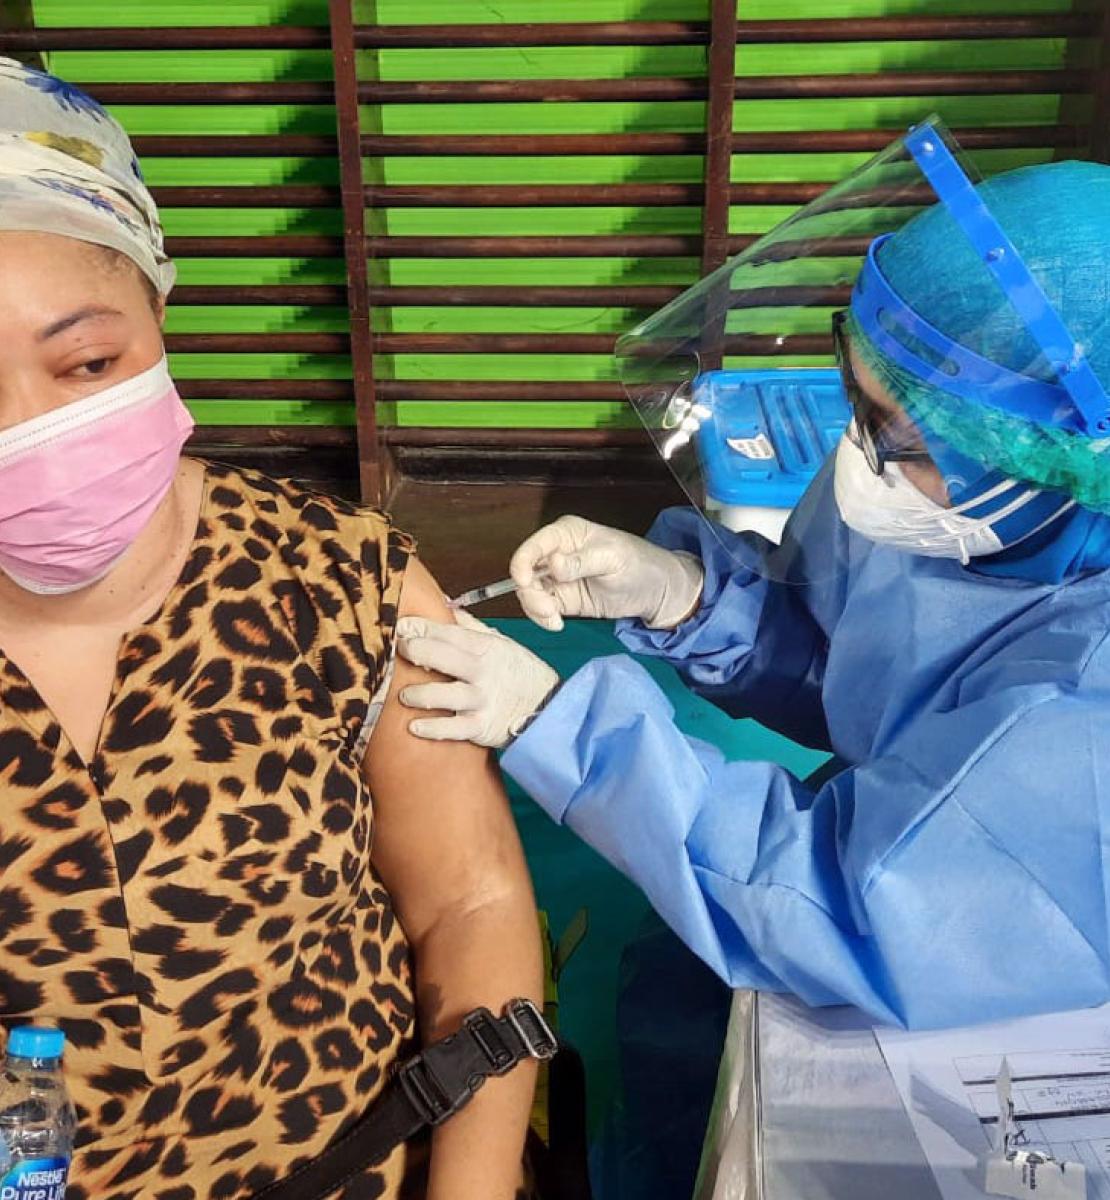 A healthcare professional gives a refugee woman, wearing a mask, her first jab of the COVID-19 vaccine.